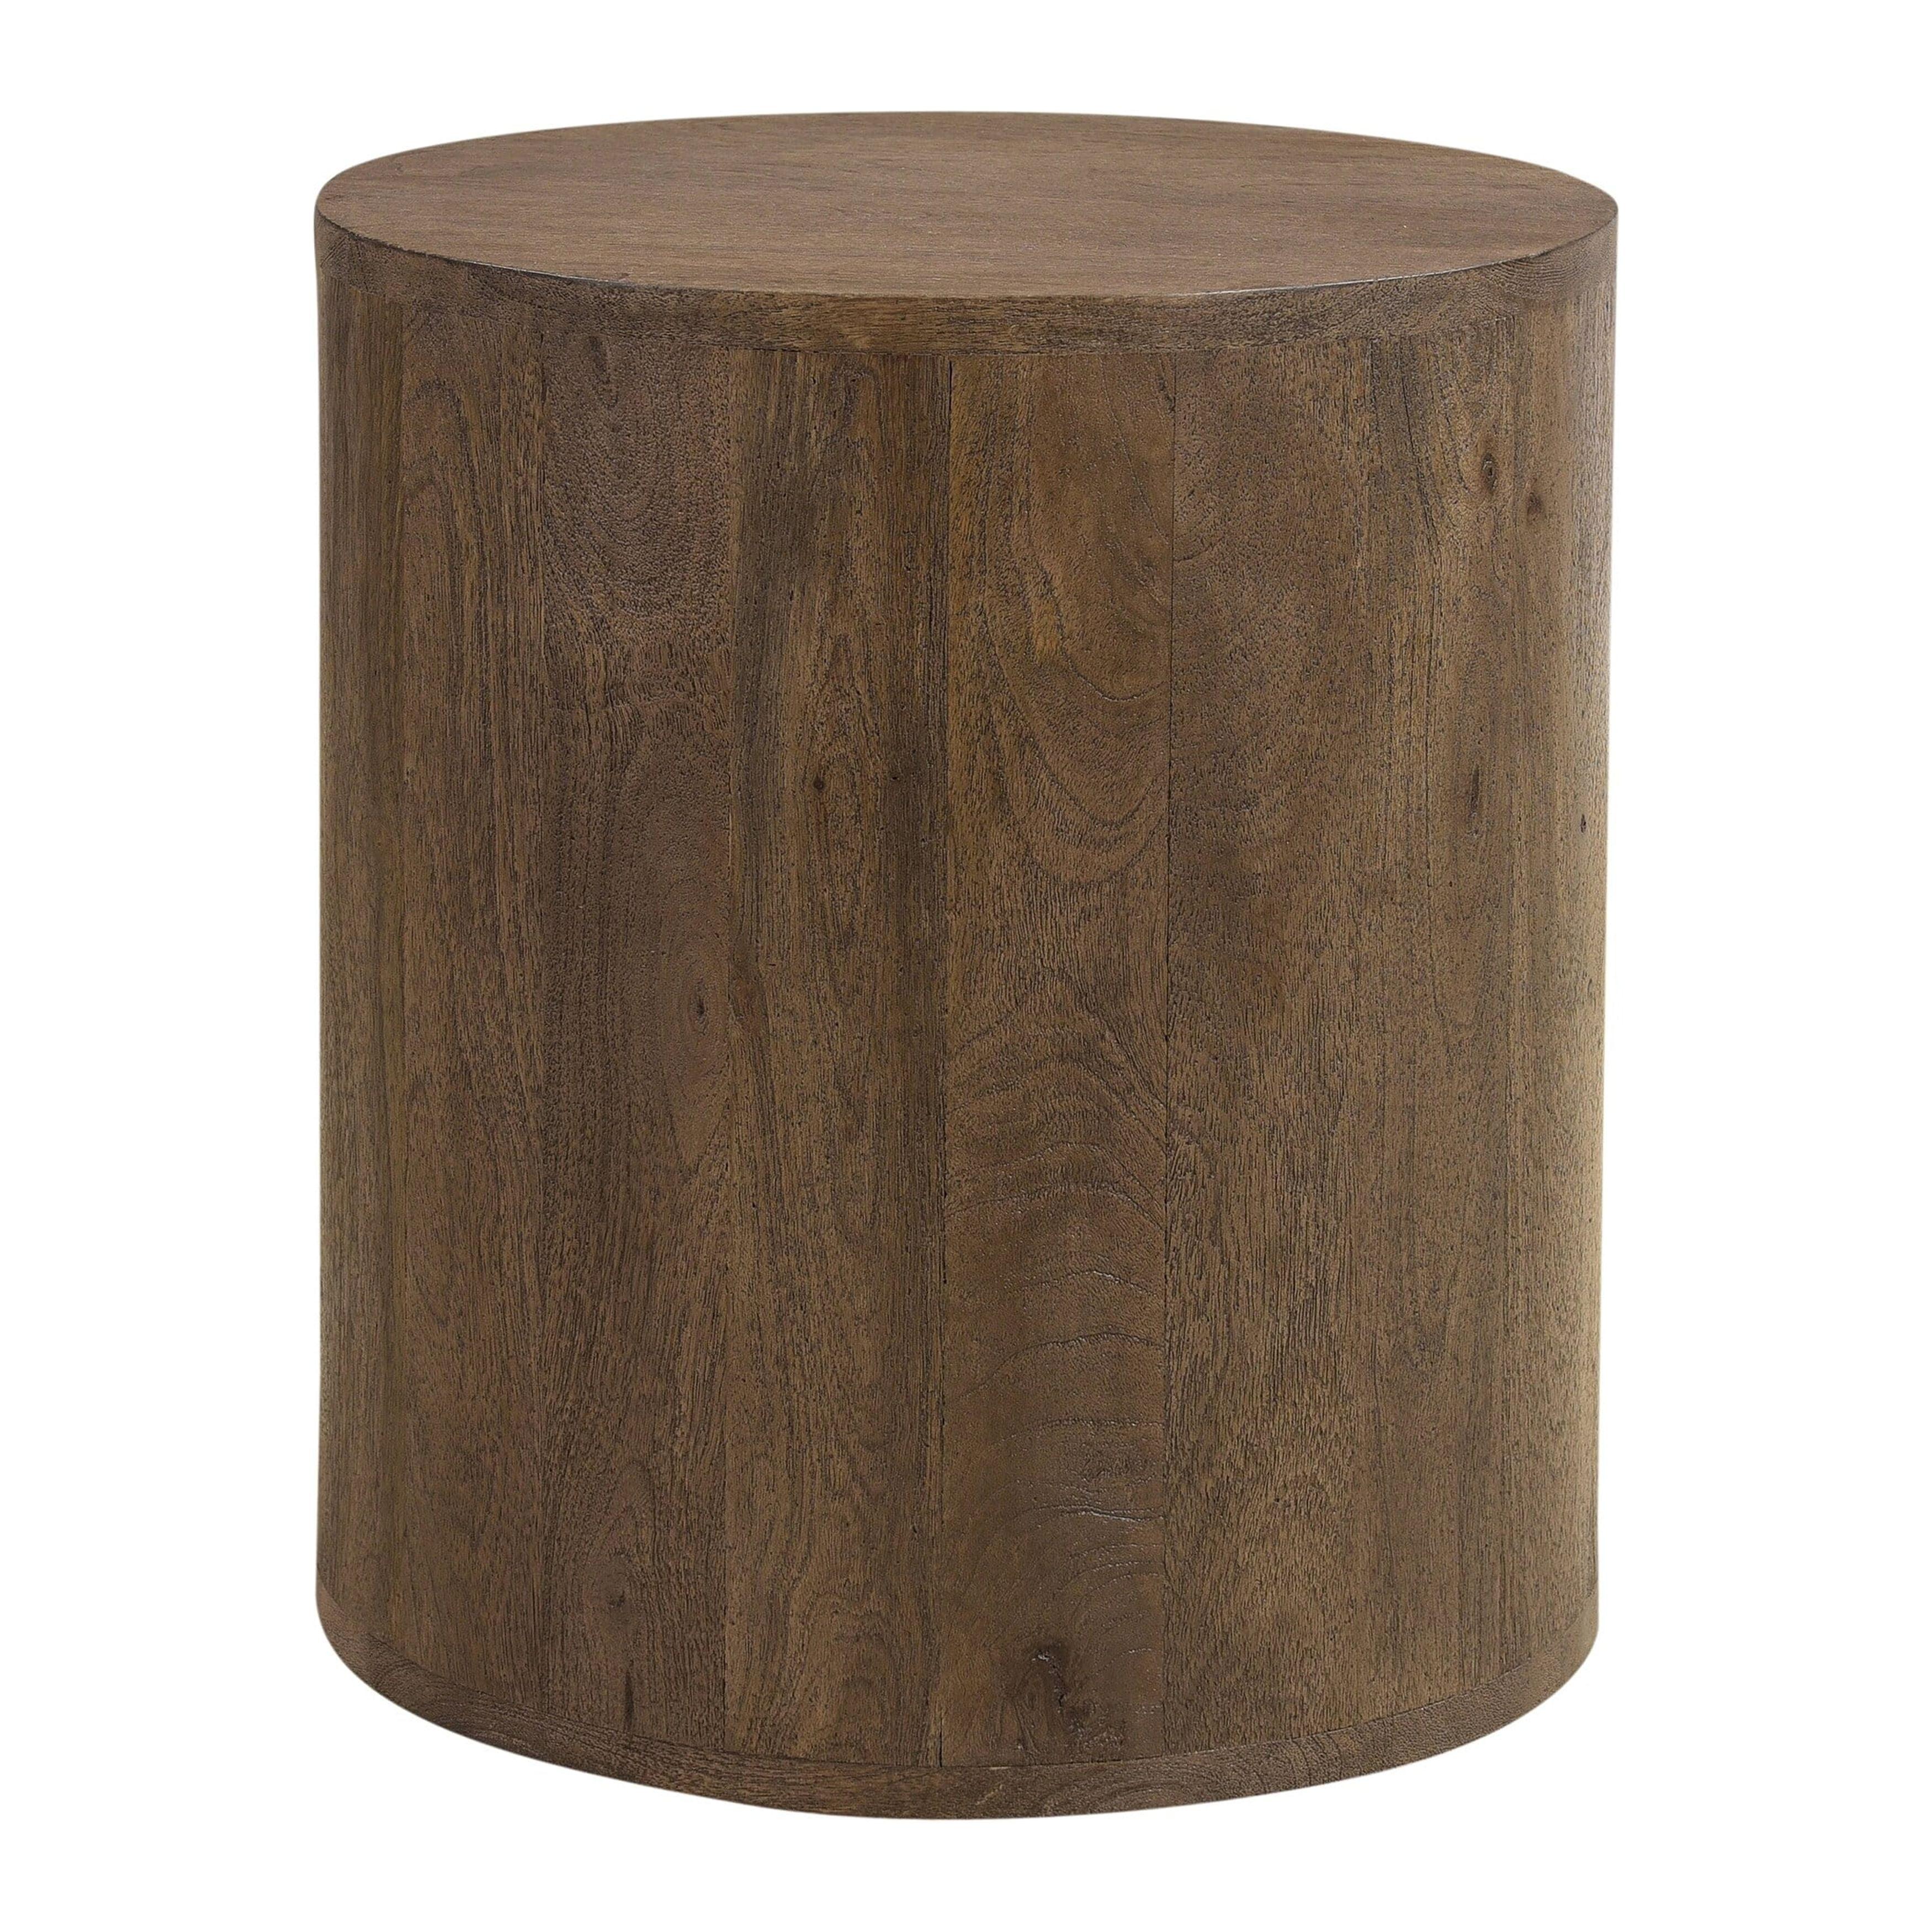 Cylindrical Solid Mango Wood Coffee Table in Dark Brown